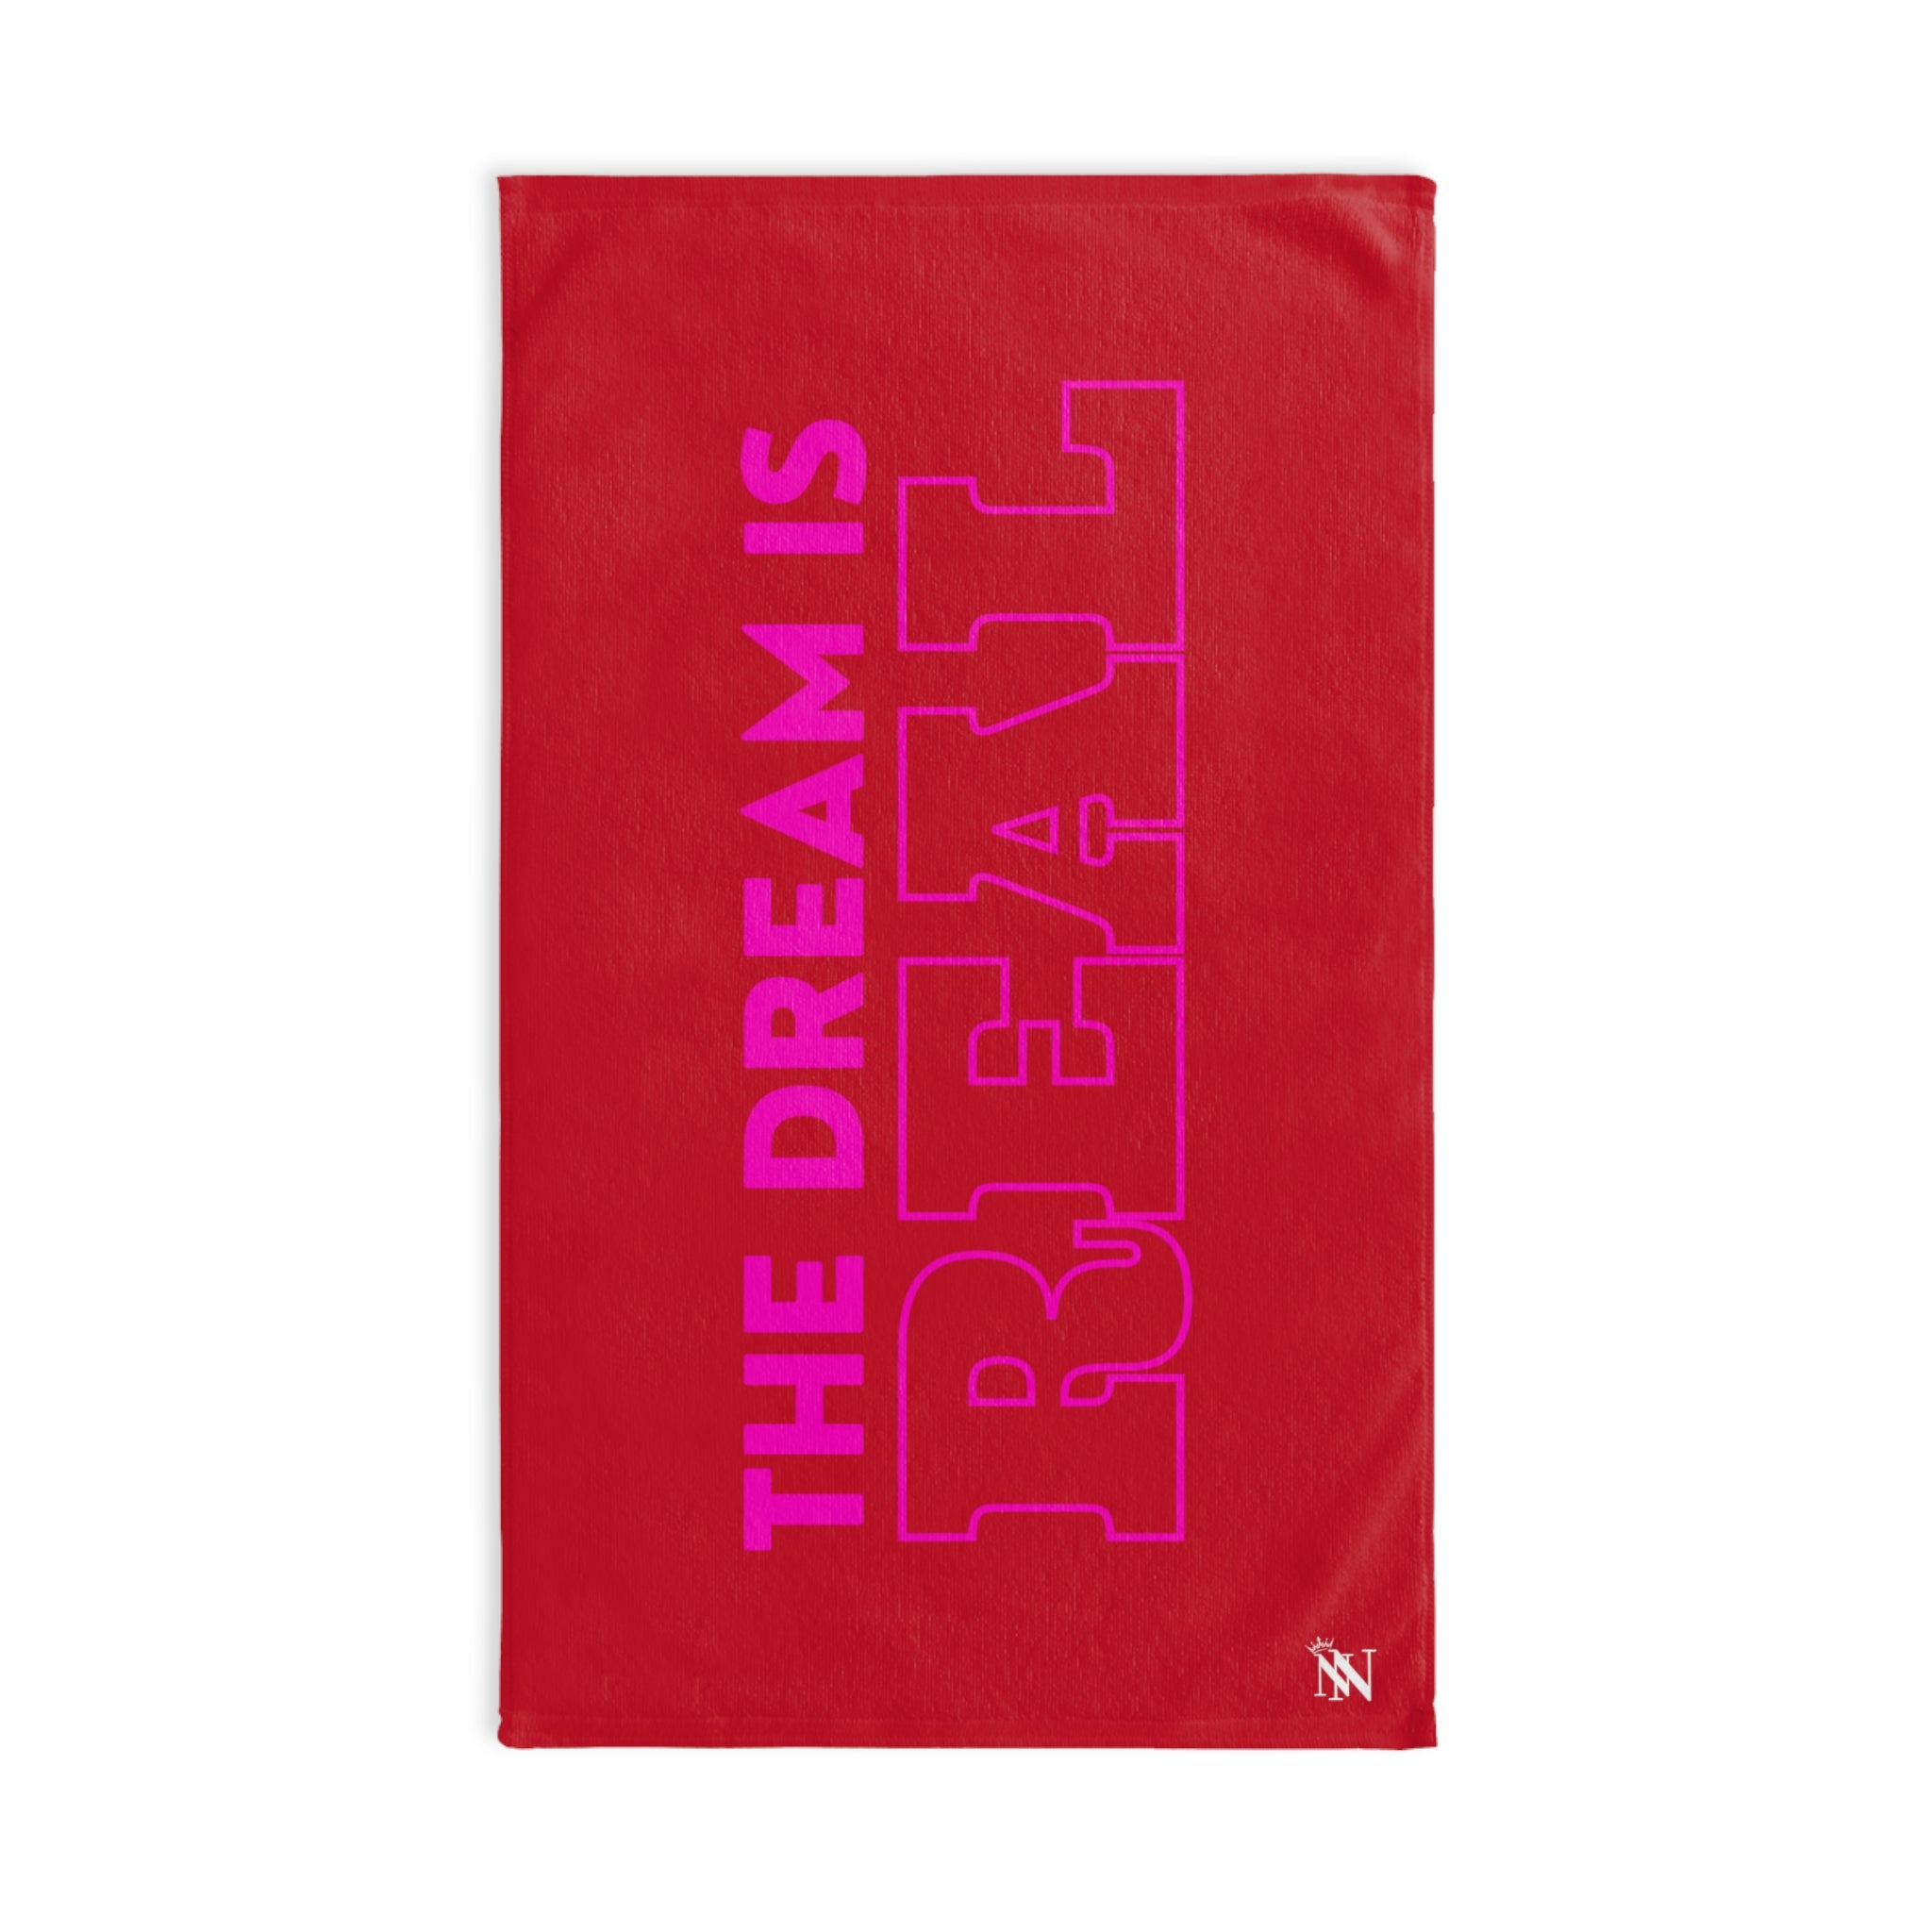 Dream Big Pink Red | Sexy Gifts for Boyfriend, Funny Towel Romantic Gift for Wedding Couple Fiance First Year 2nd Anniversary Valentines, Party Gag Gifts, Joke Humor Cloth for Husband Men BF NECTAR NAPKINS